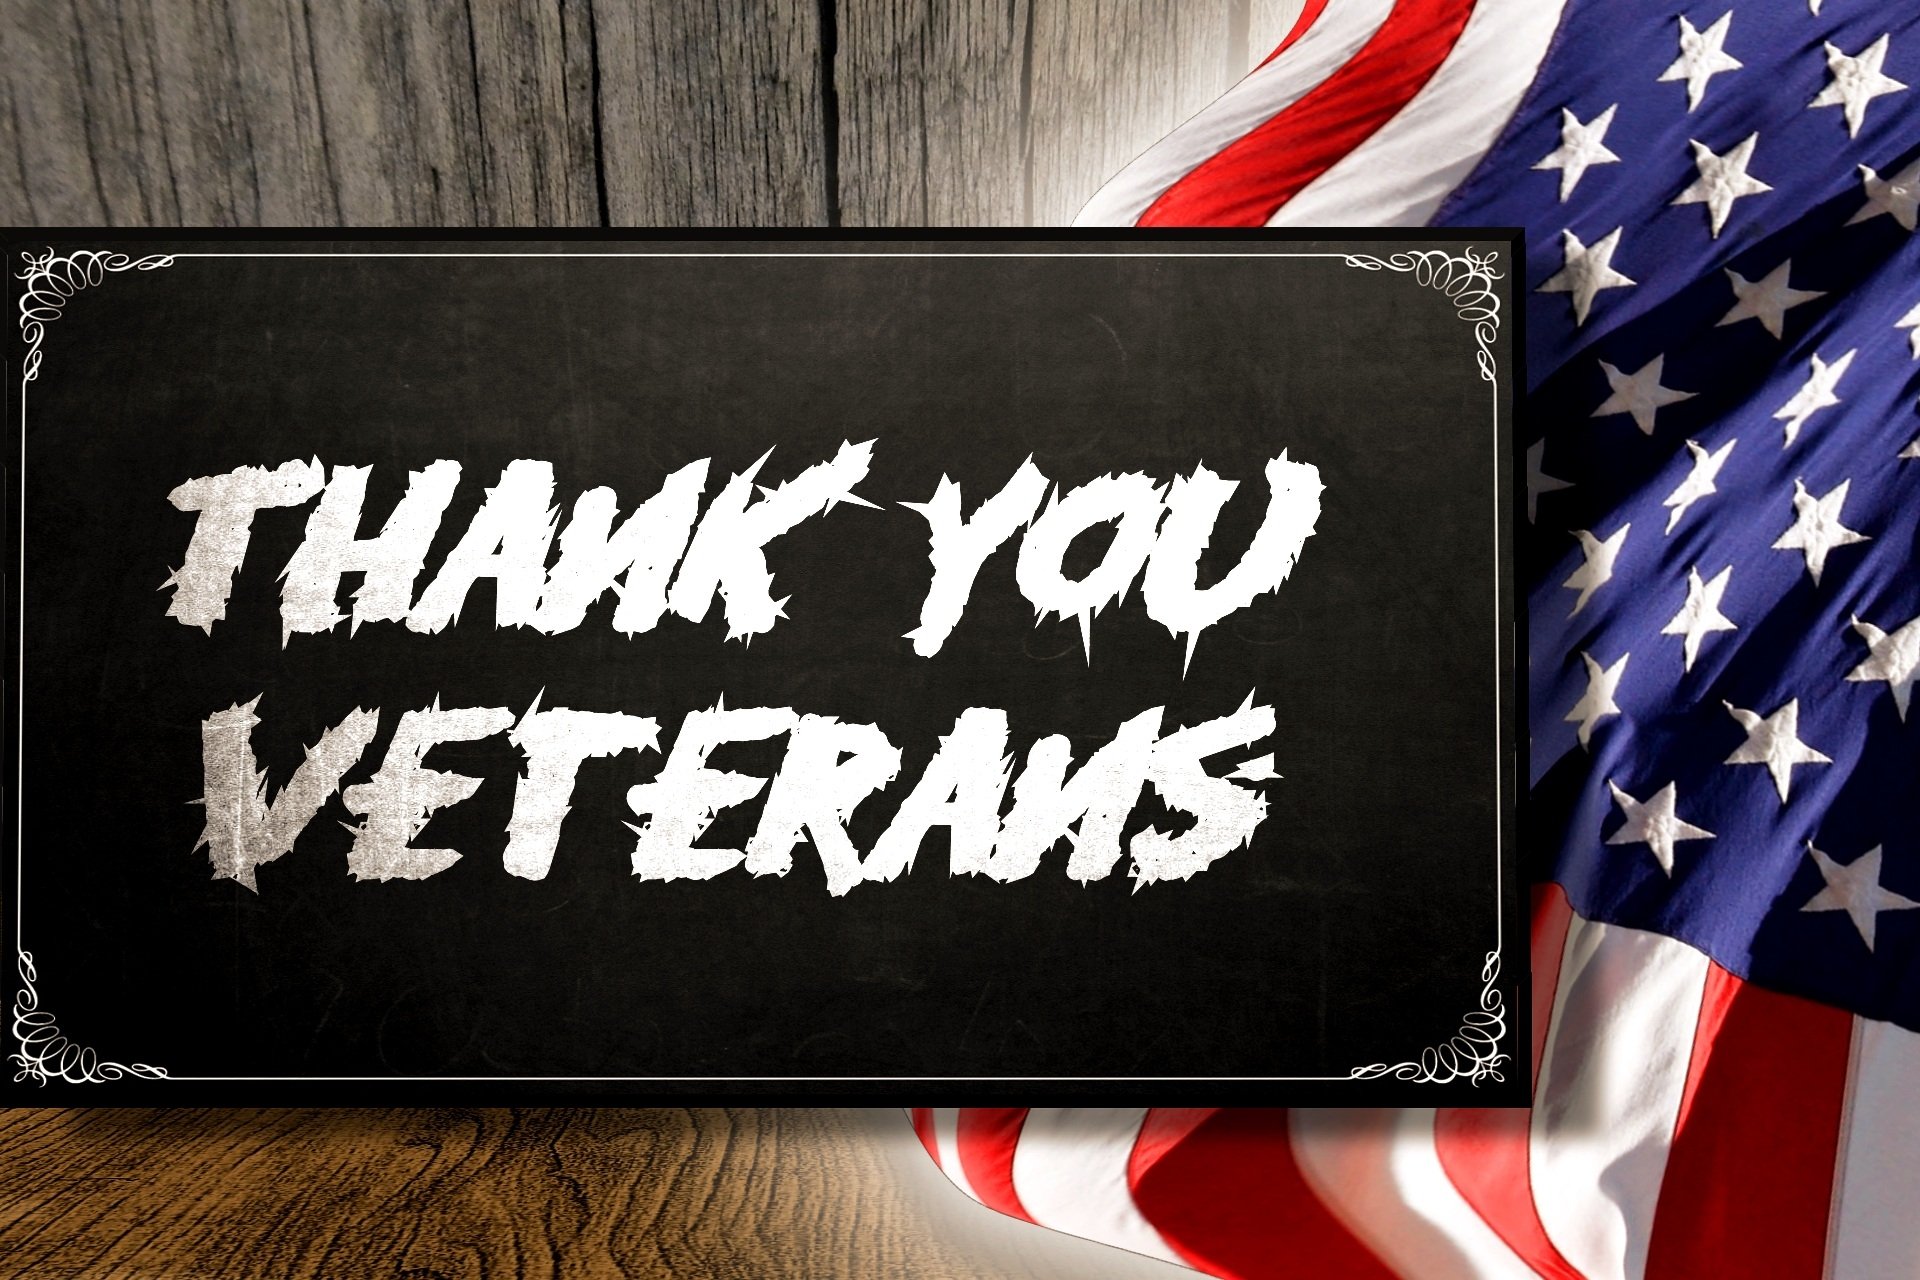 Veterans Day wallpapers hd 11